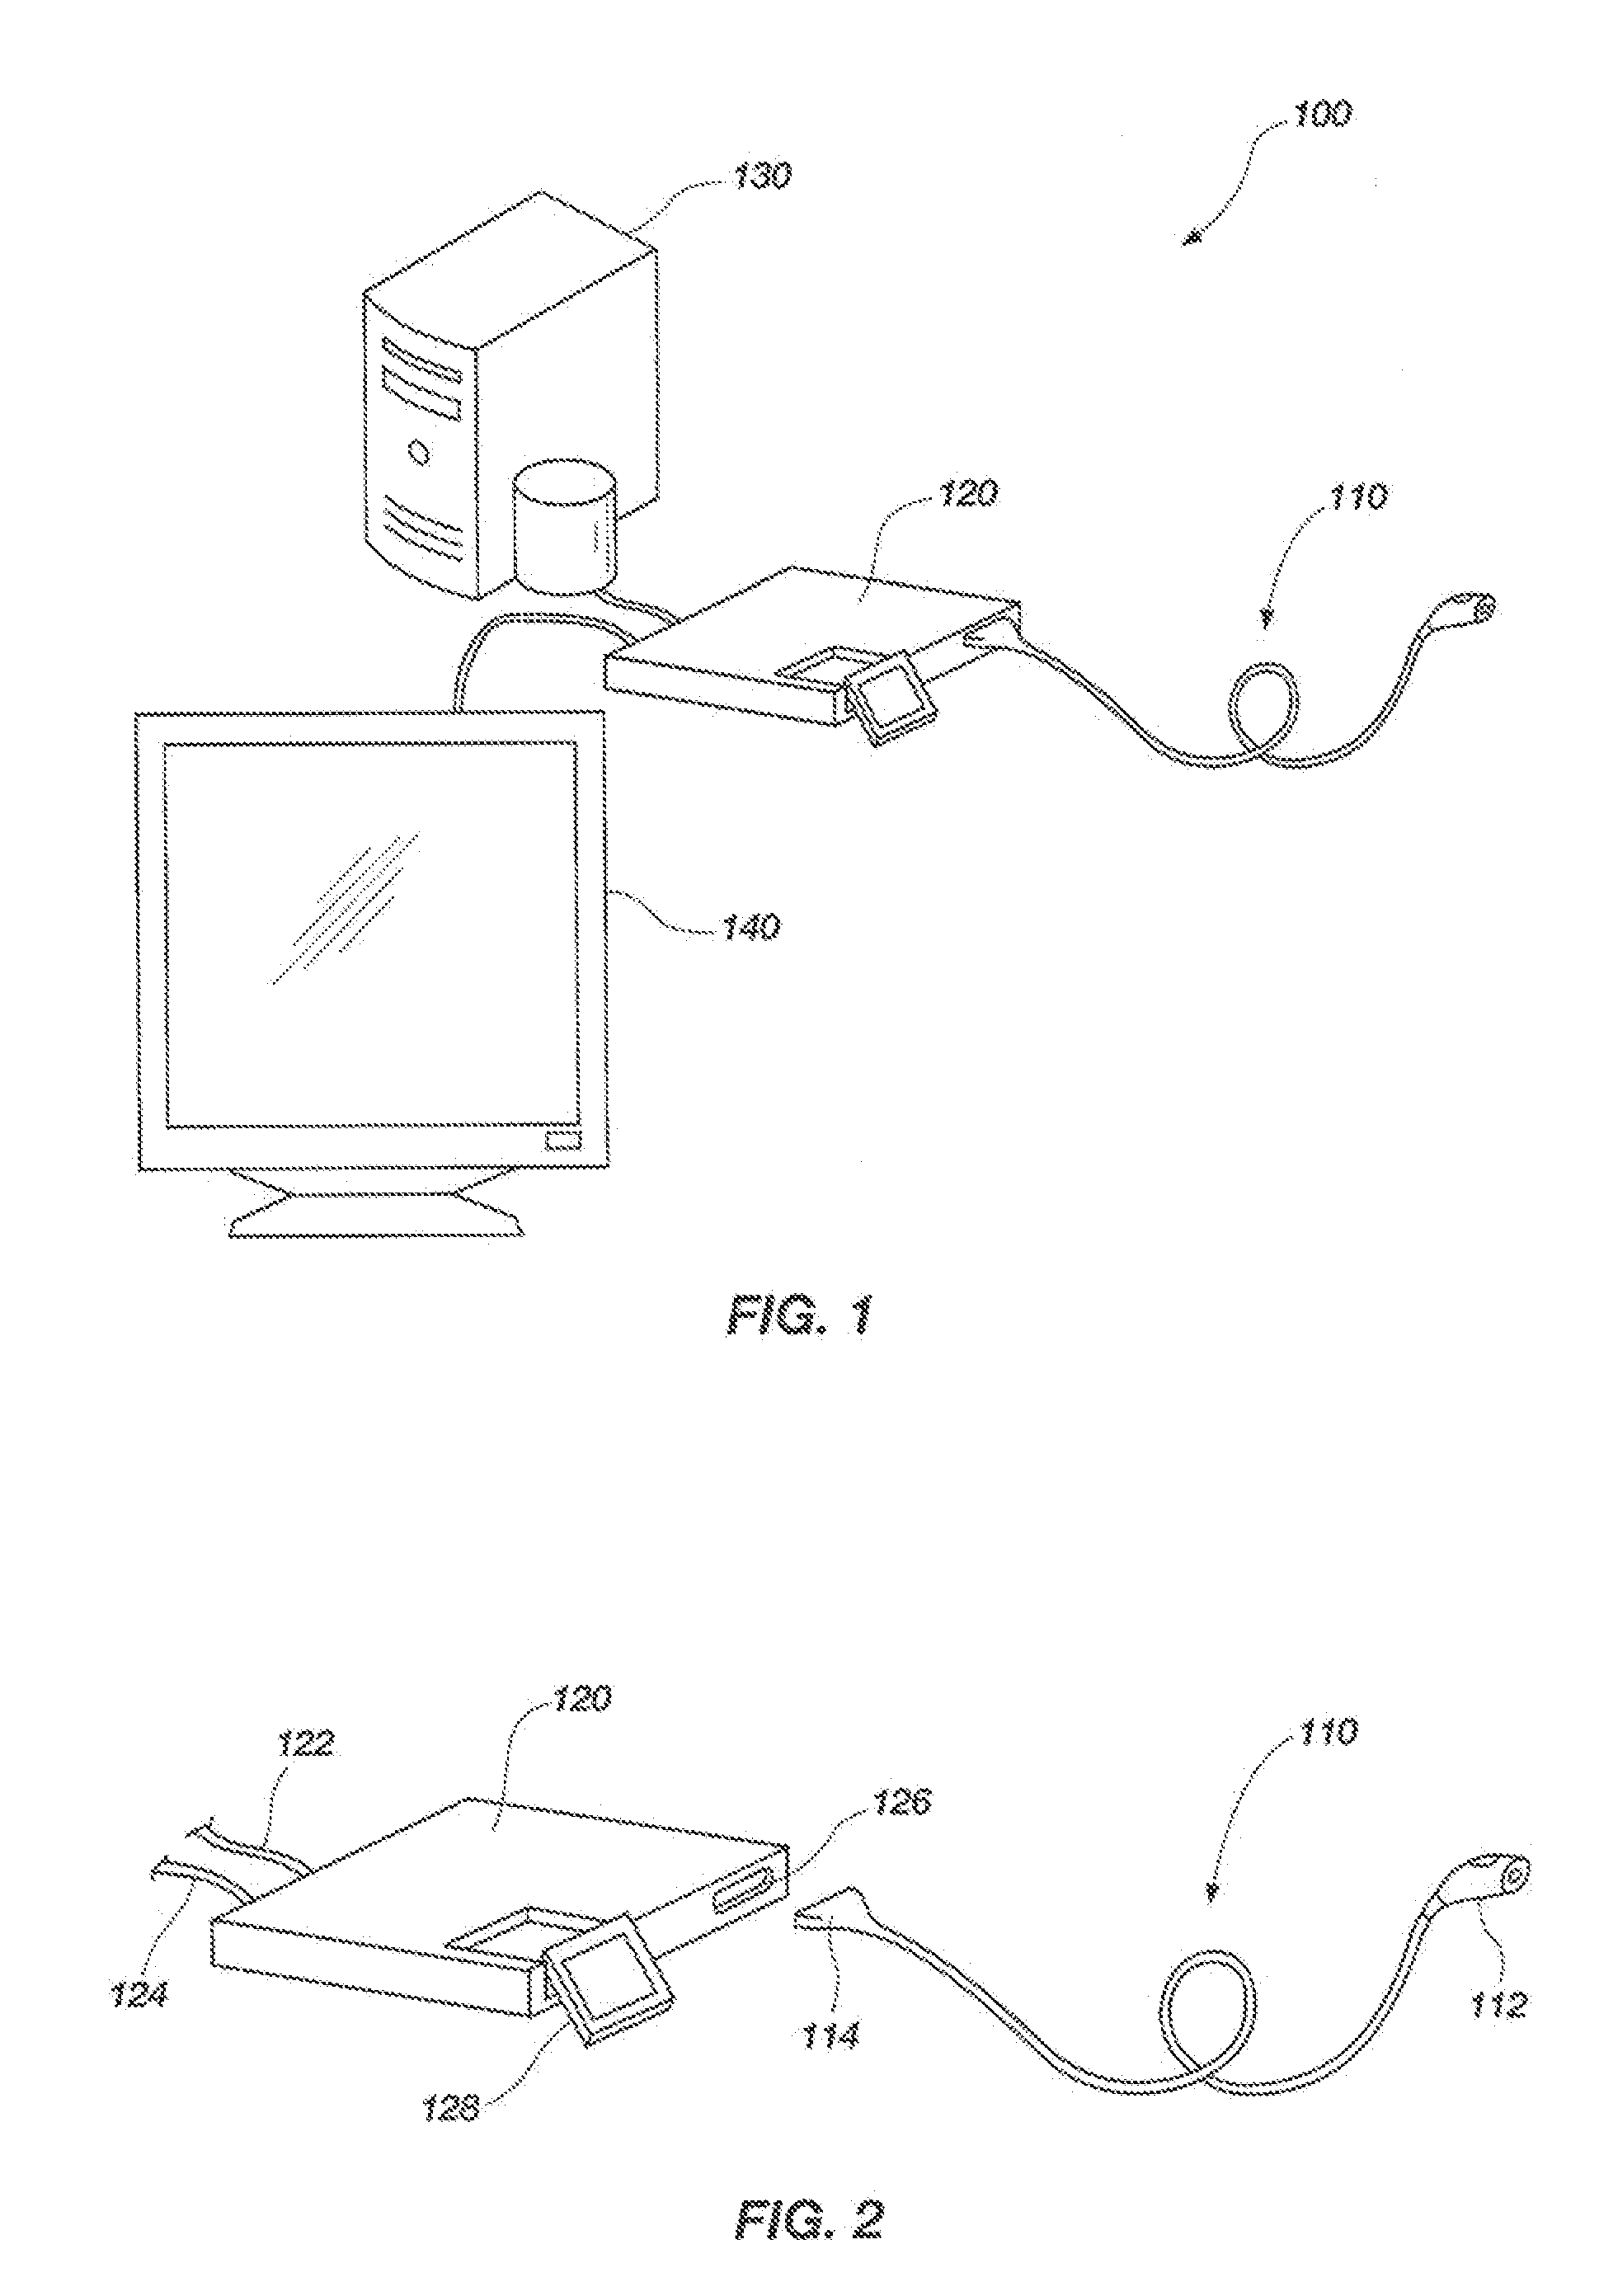 Imaging sensor with thermal pad for use in a surgical application